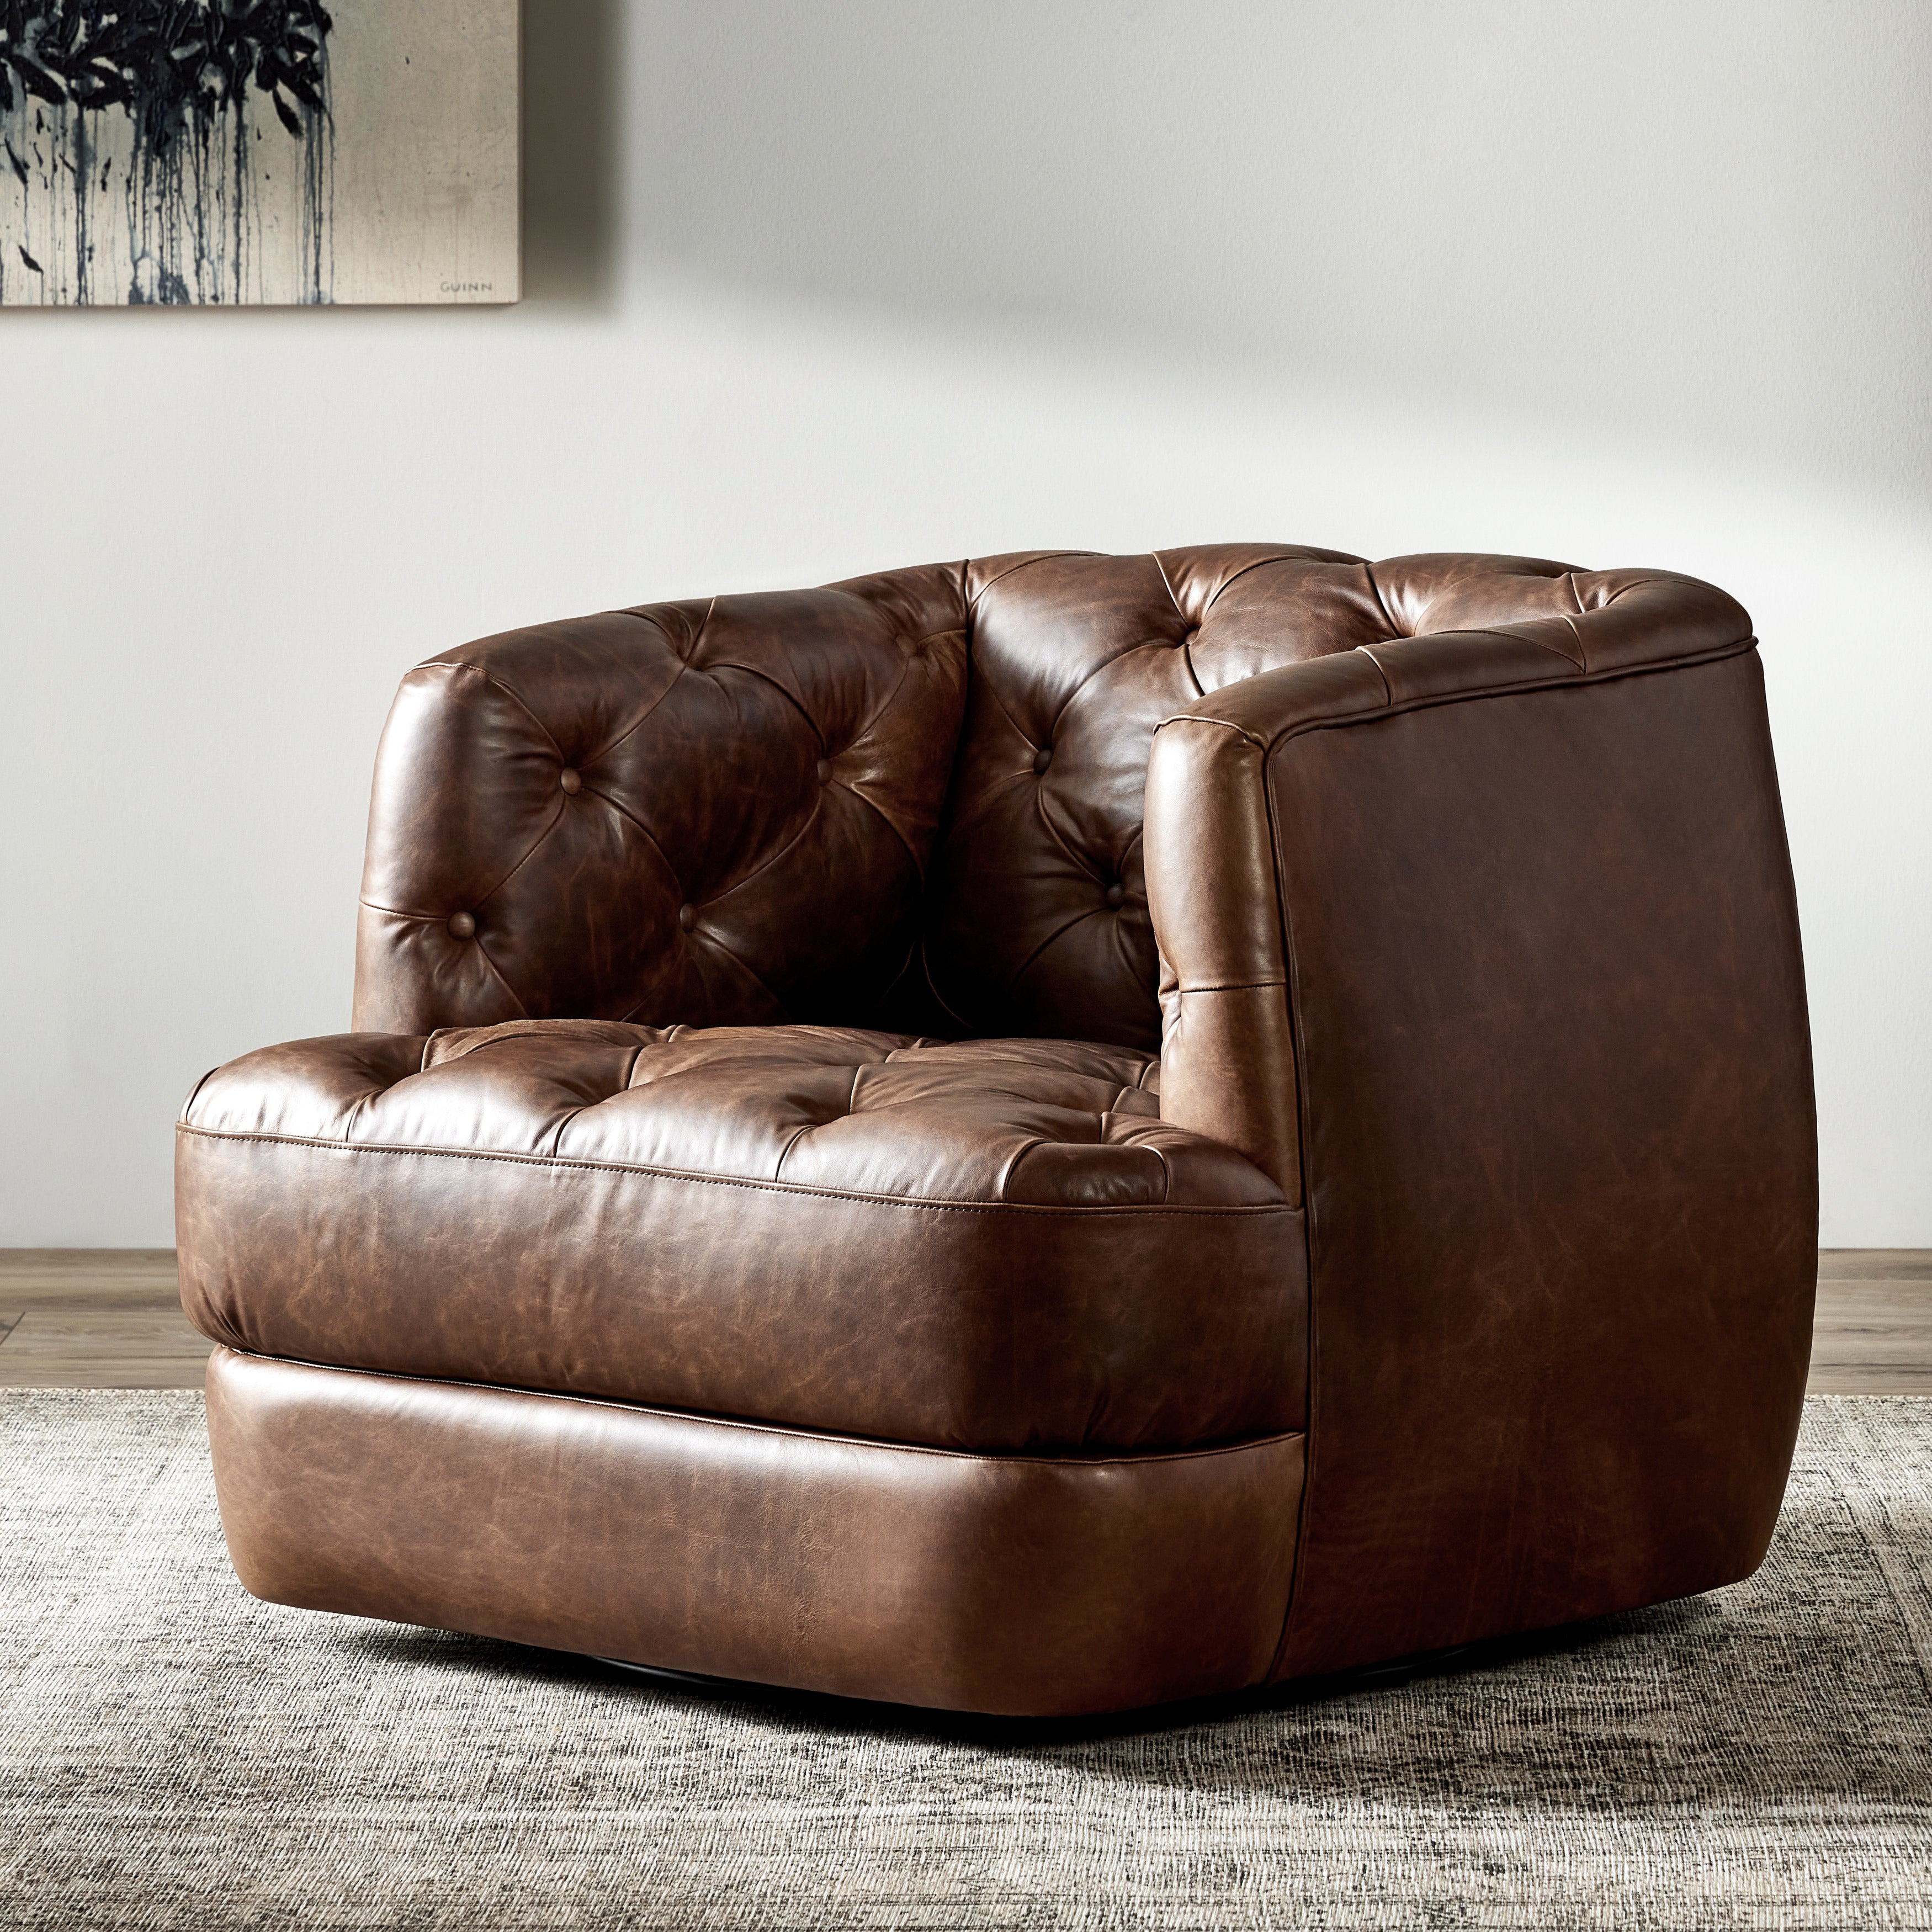 Old English-inspired top-grain leather is finished with a soft hand for a vintage, lived-in look on this traditionally inspired chair. Handcrafted in Italy, the richness of this distinctive, full-bodied leather develops an even-richer patina over time. Button tufting texturizes a comfortably curved back and sides, while a 360-degree swivel modernizes the whole look. Amethyst Home provides interior design, new construction, custom furniture, and area rugs in the Omaha metro area.